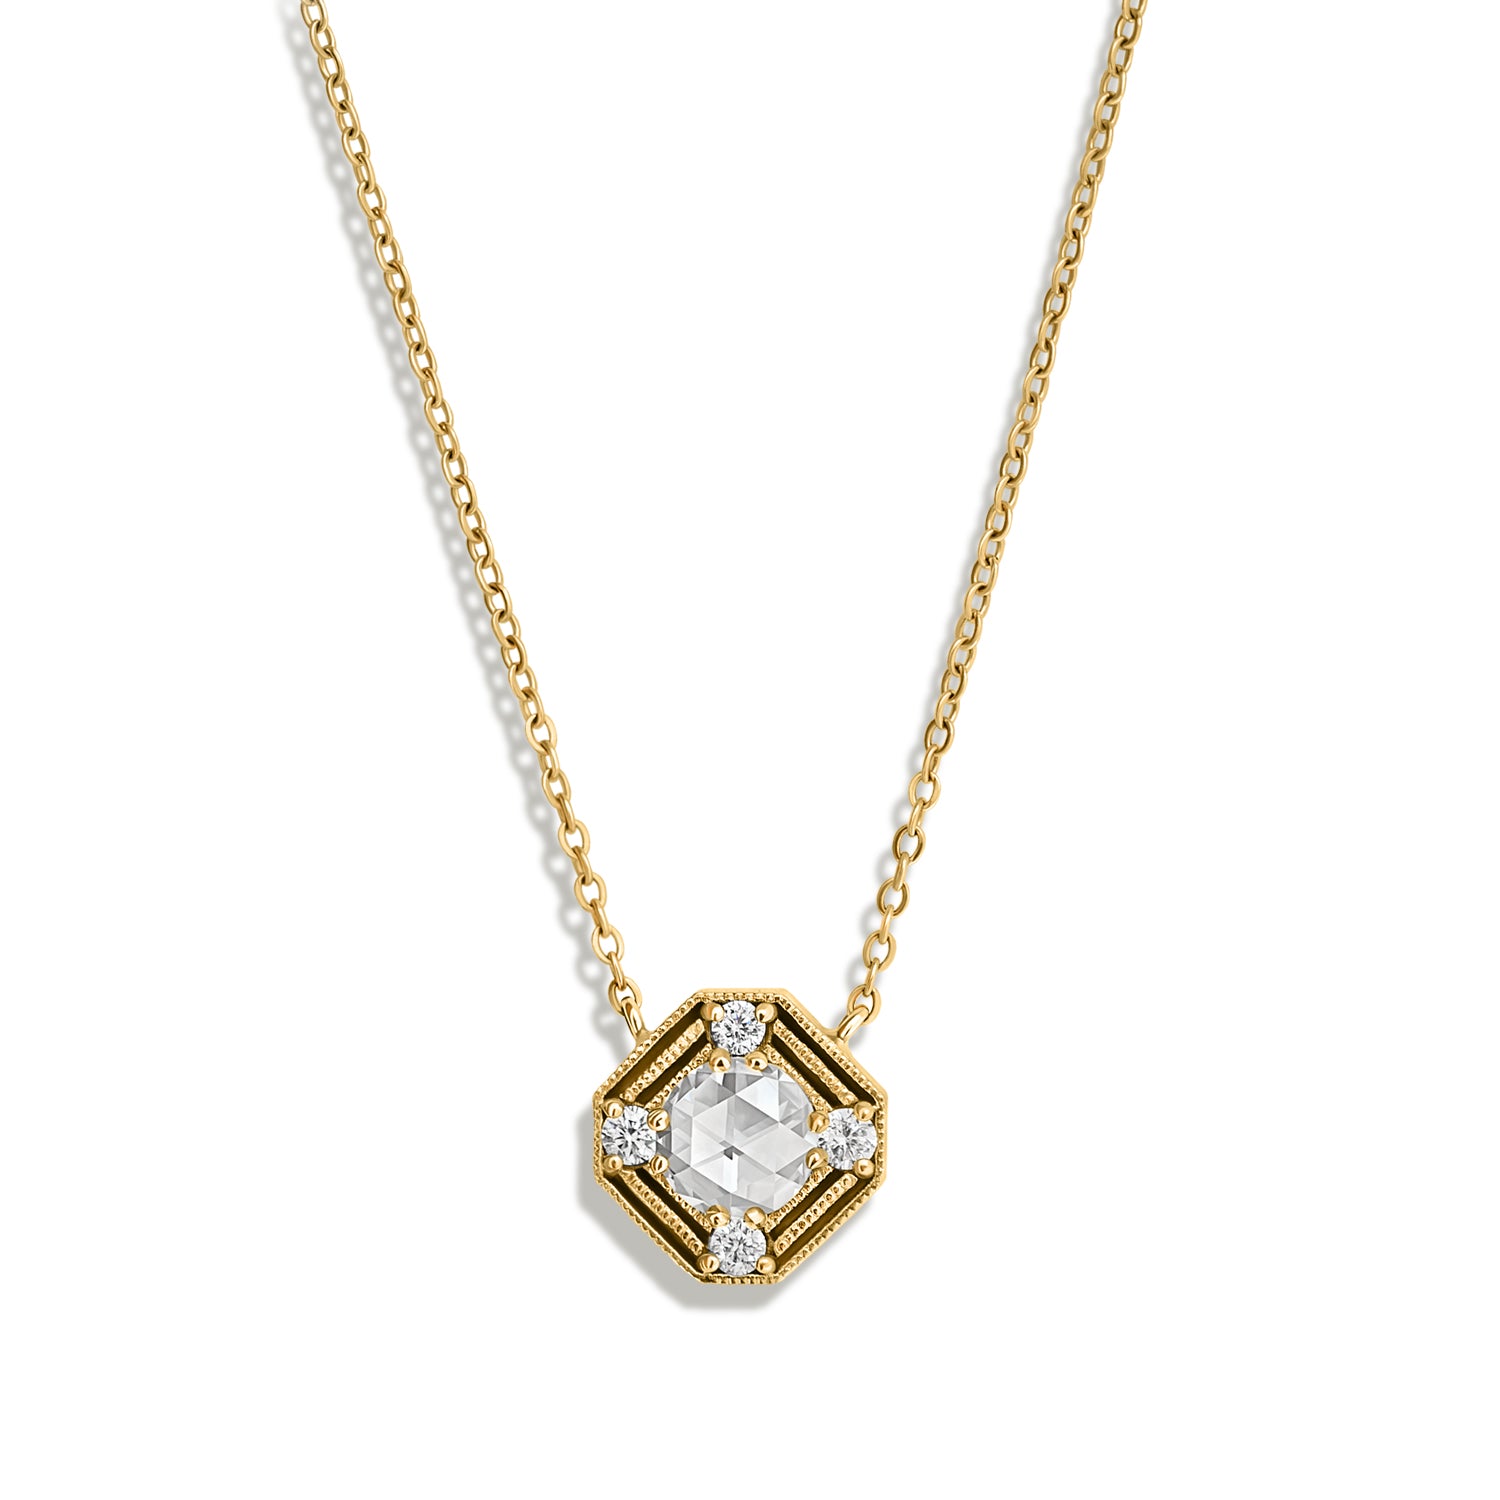 Necklaces in LA and California – Berlinger Jewelry